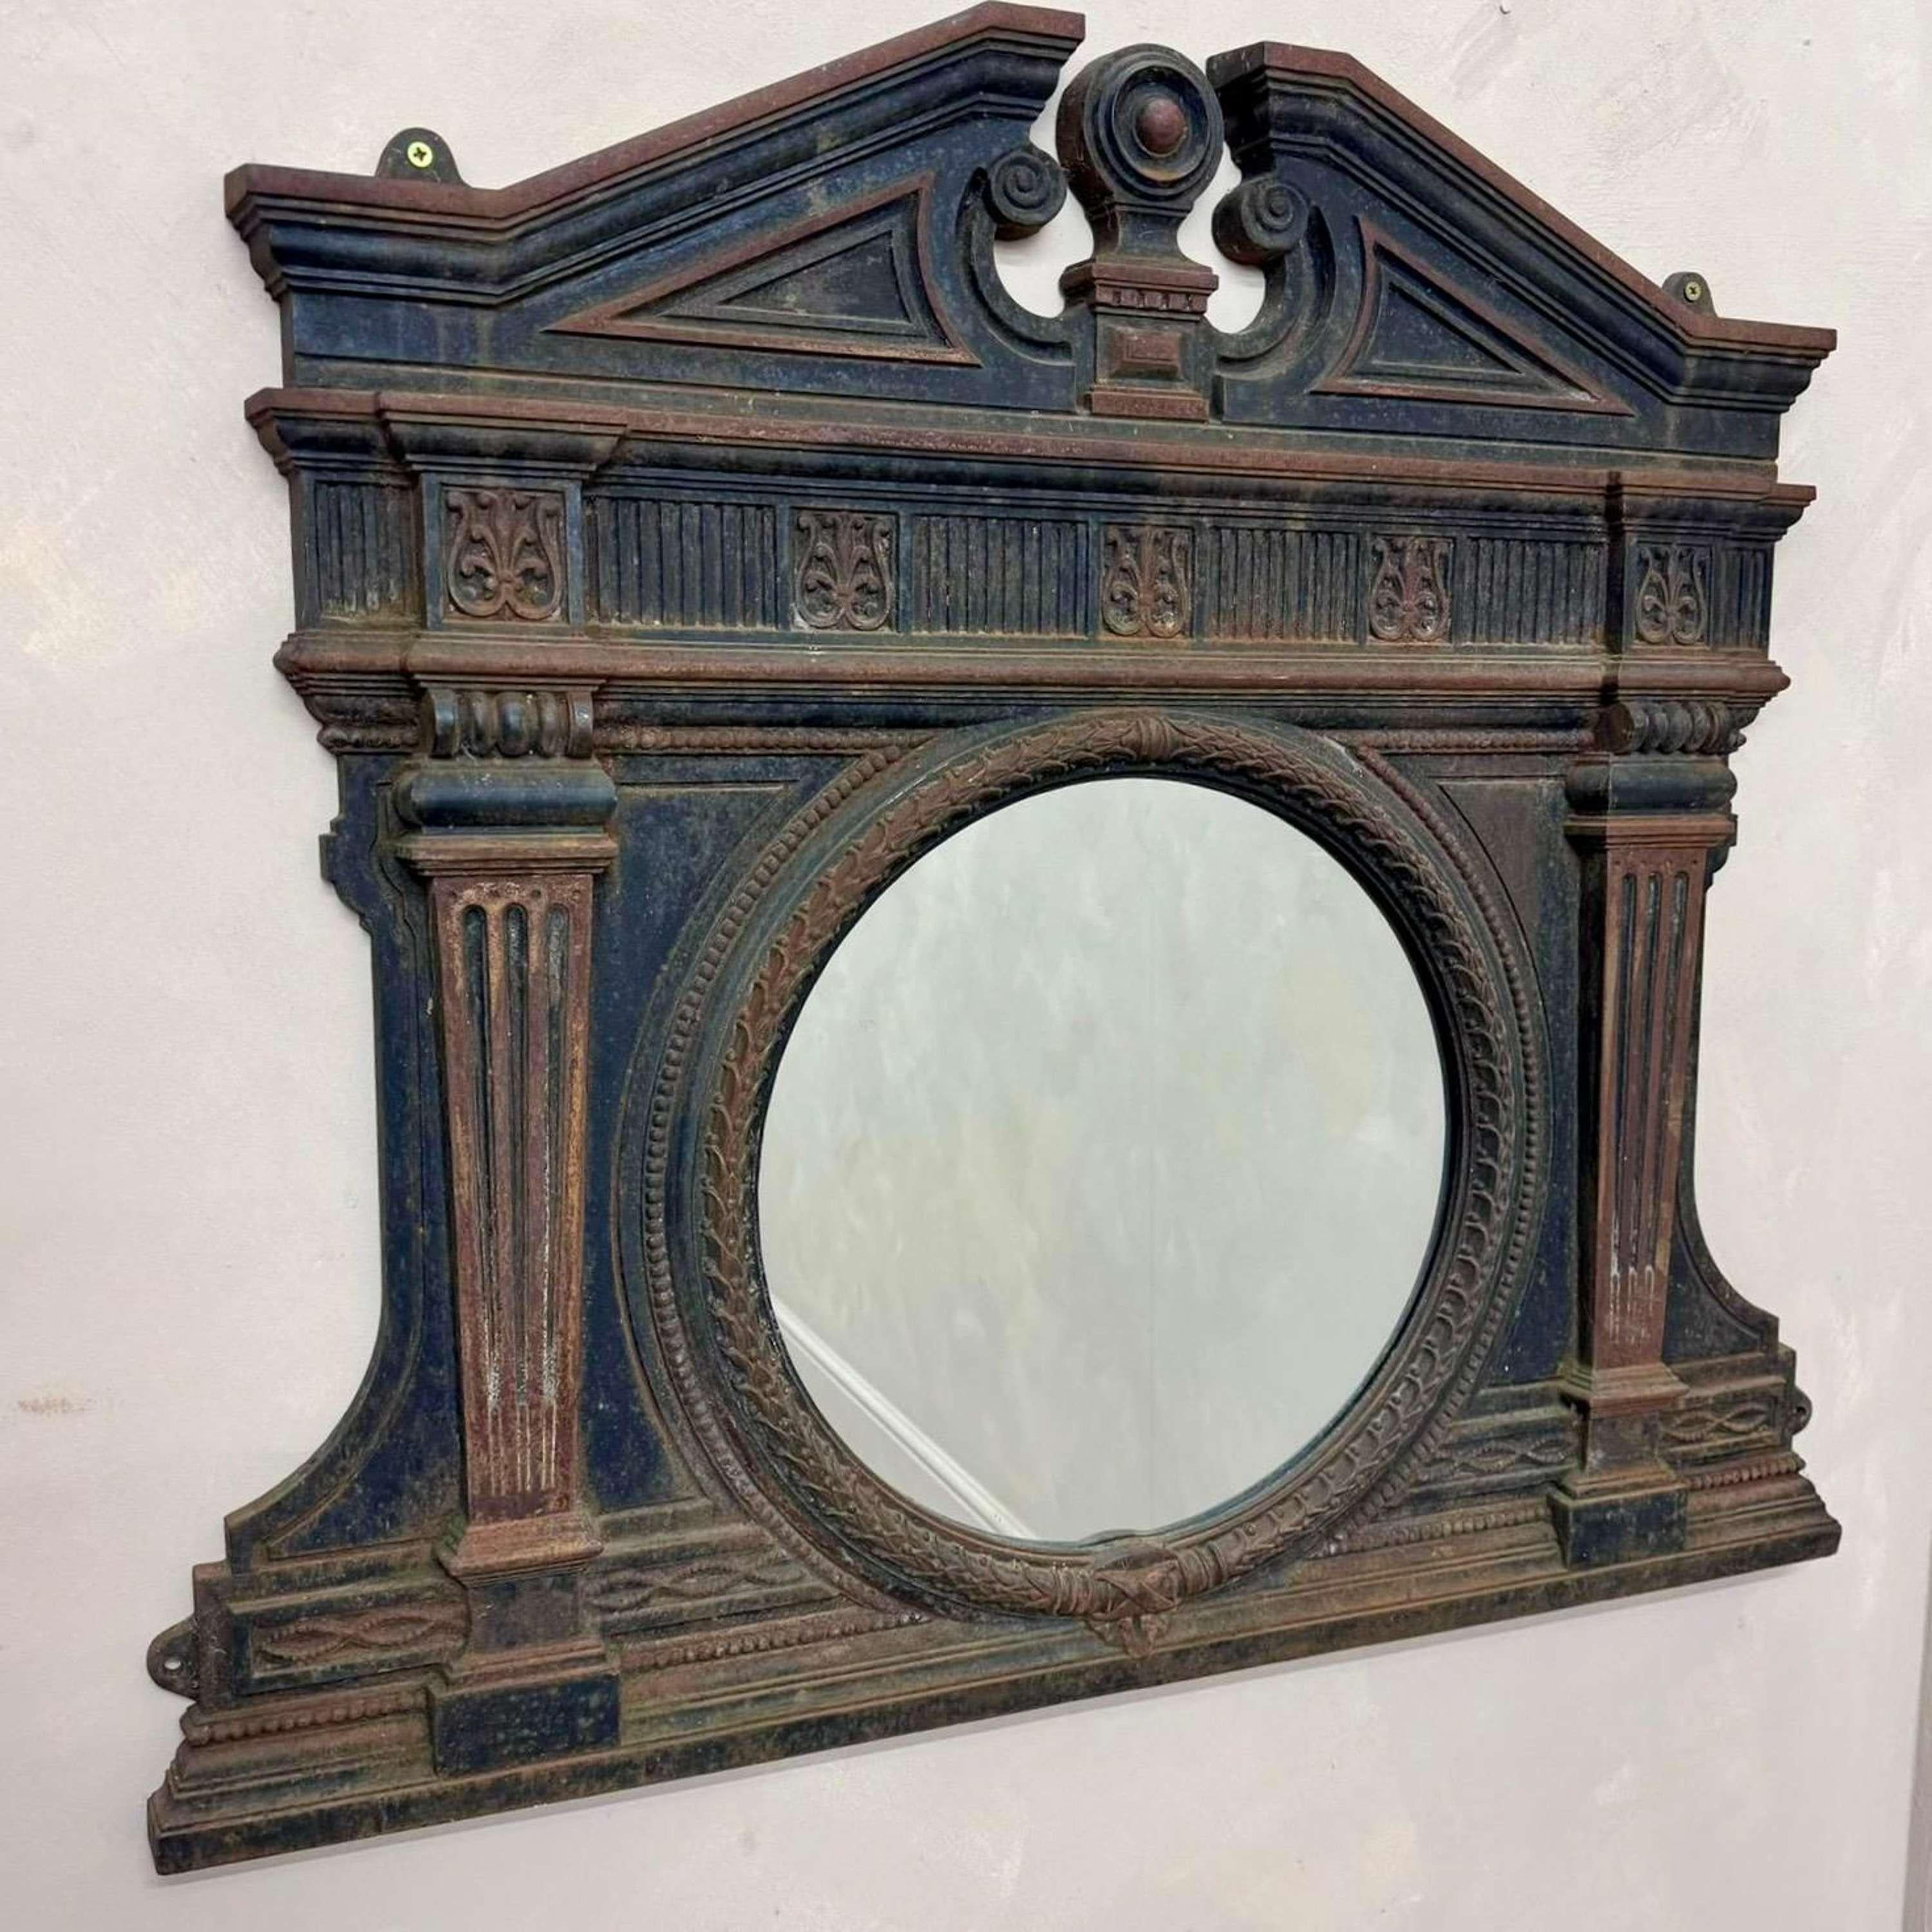 A Victorian, cast iron Over Mantle Mirror.
This would have been placed over/ built into a cast iron mantlepiece.
With decorative moulding, rope twist detail around the mirror with a shapely  pediment.
We have 2 of these which were removed from a 